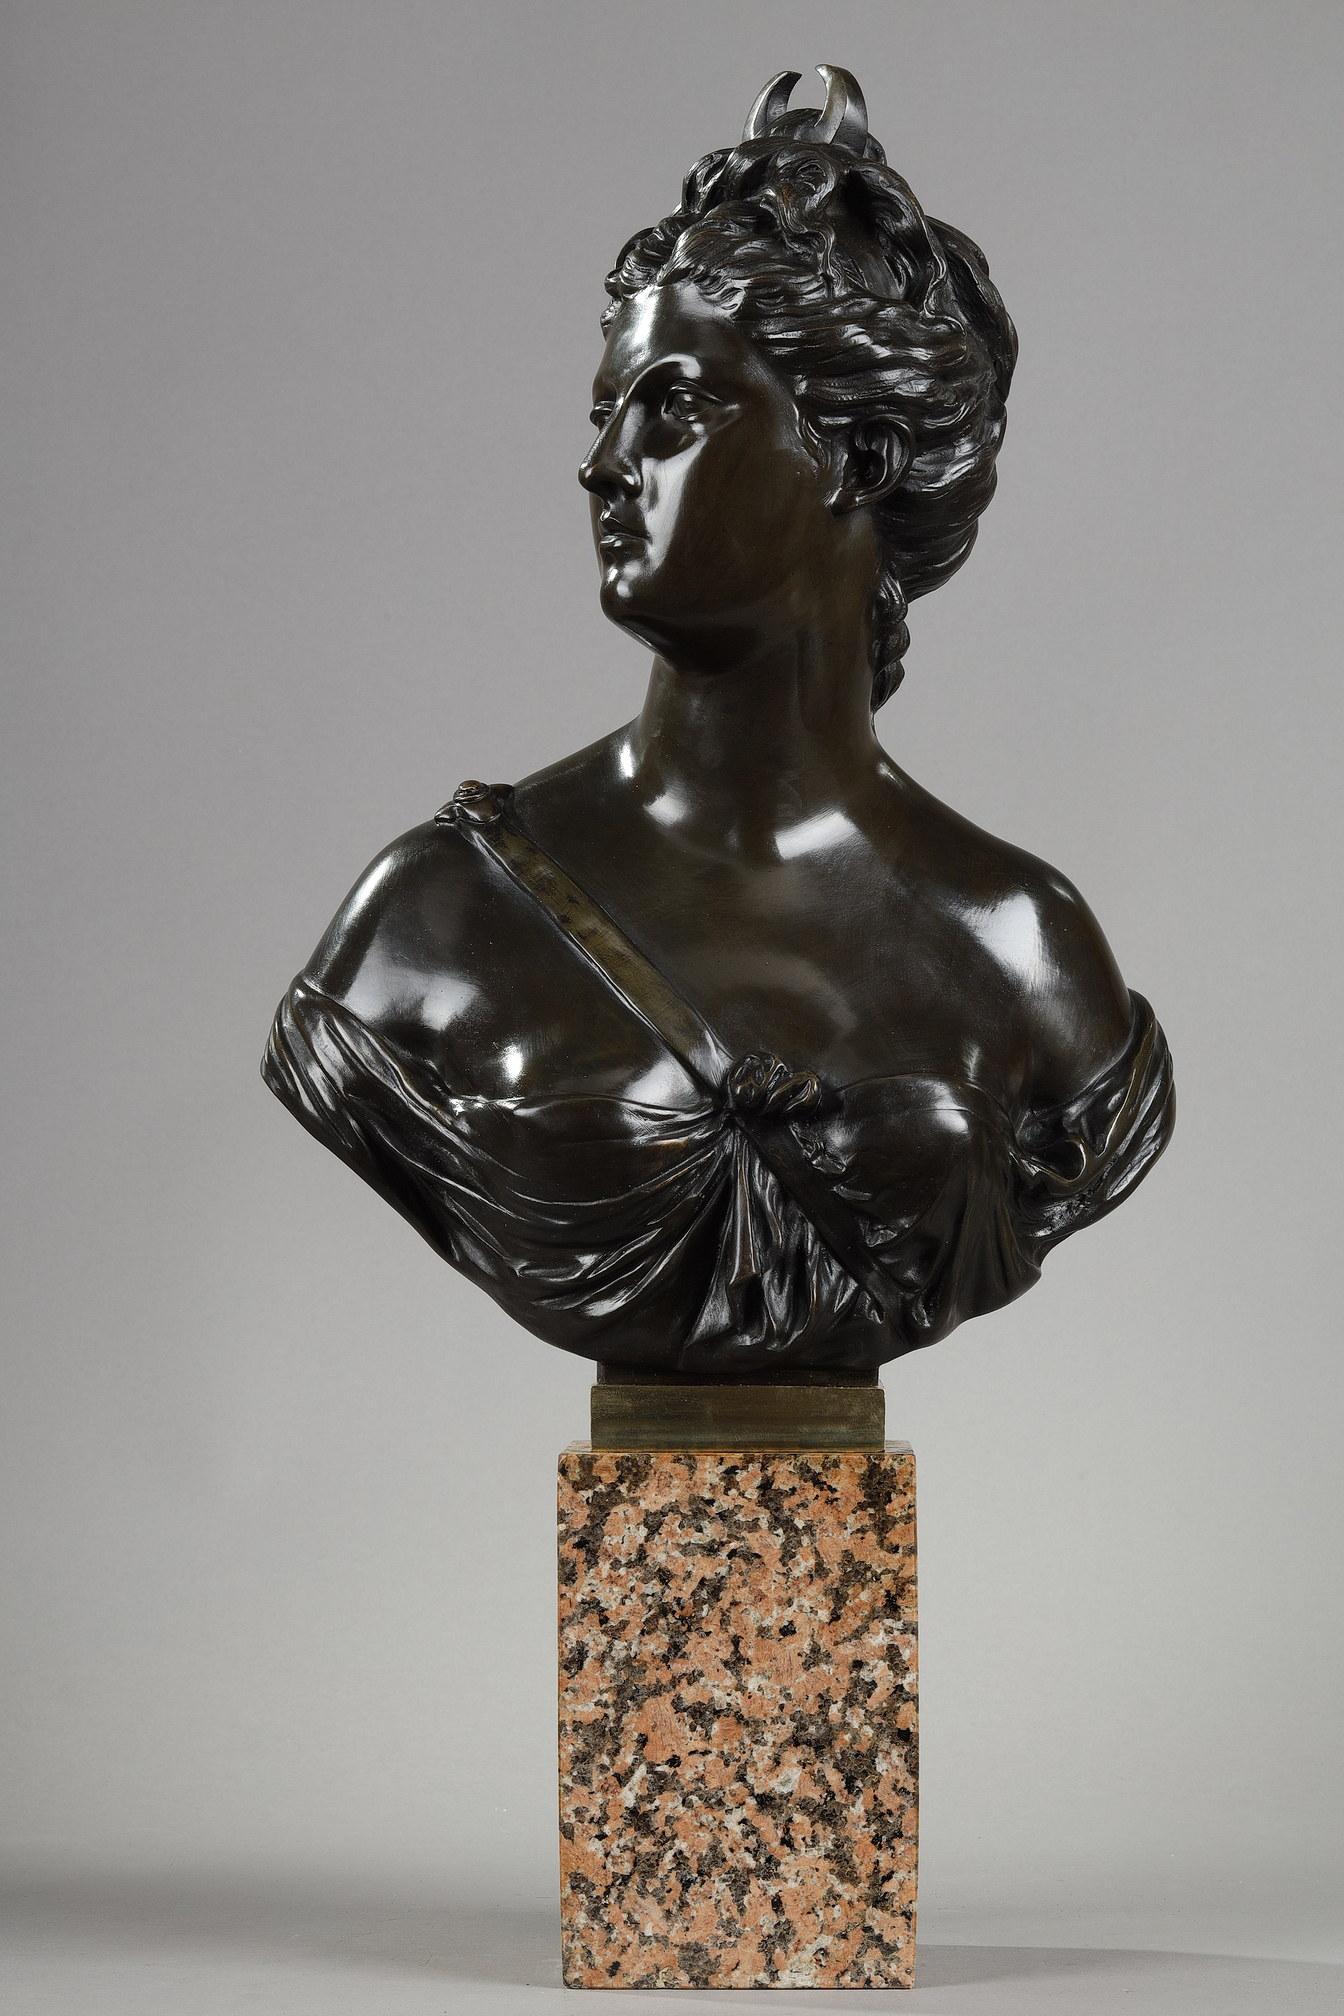 Sculpture in bronze representing Diana the hunter after Jean-Antoine Houdon (1741- 1828). In Roman mythology, Diana is the goddess of the hunt and of the night, similar to Artemis in Greek mythology. She is depicted wearing a tunic with a crescent